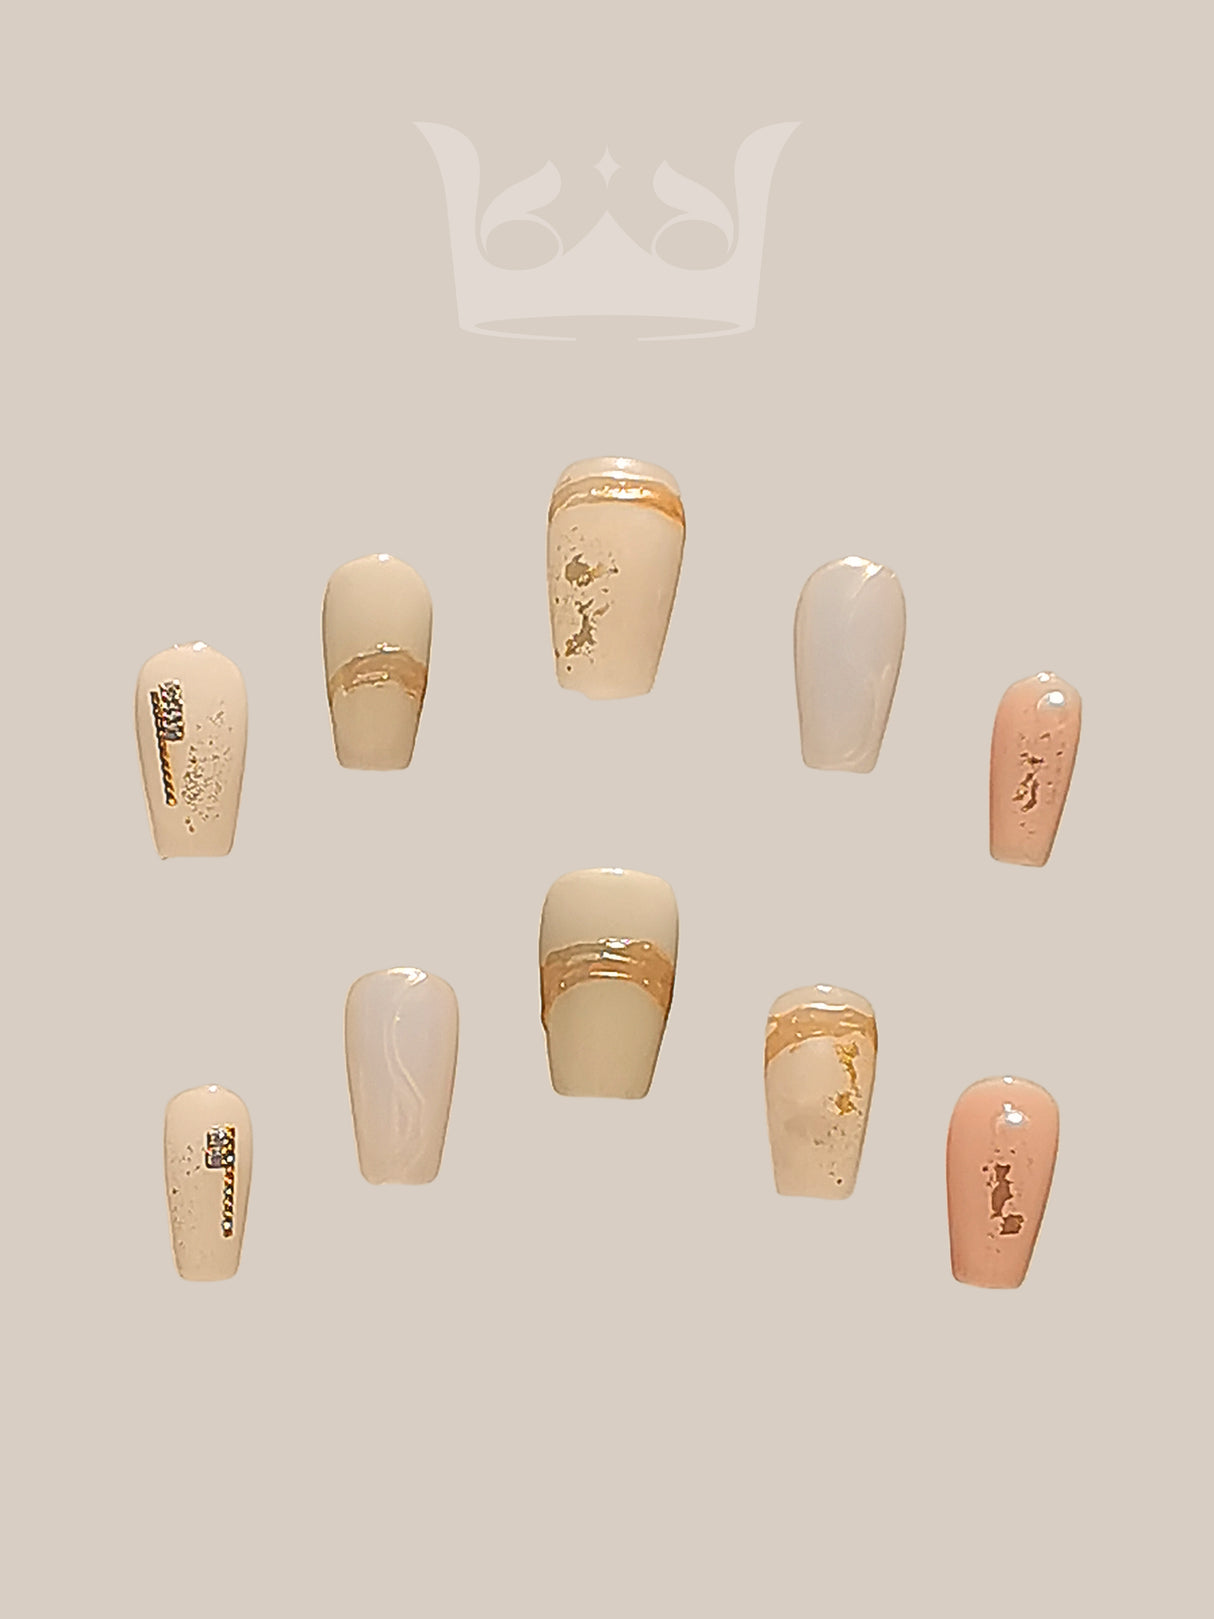 Sophisticated and elegant nail art design with gold foil accents, negative space, embellishments, modern French tip, and glossy finish for special occasions.